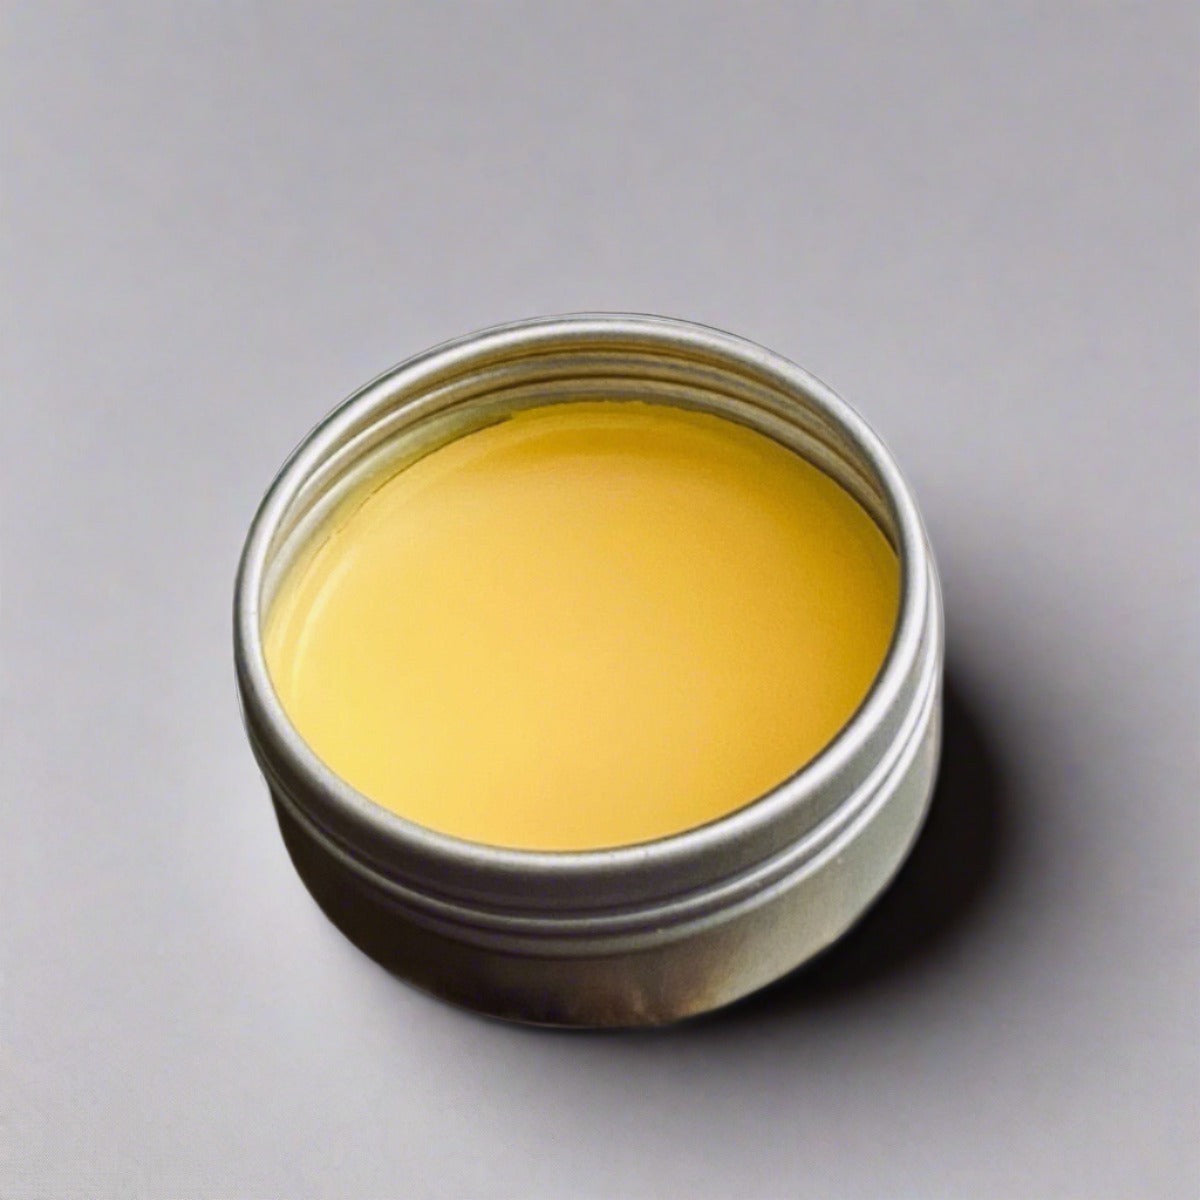 Small tin of orange butter lip balm showcasing its orange color and creamy texture